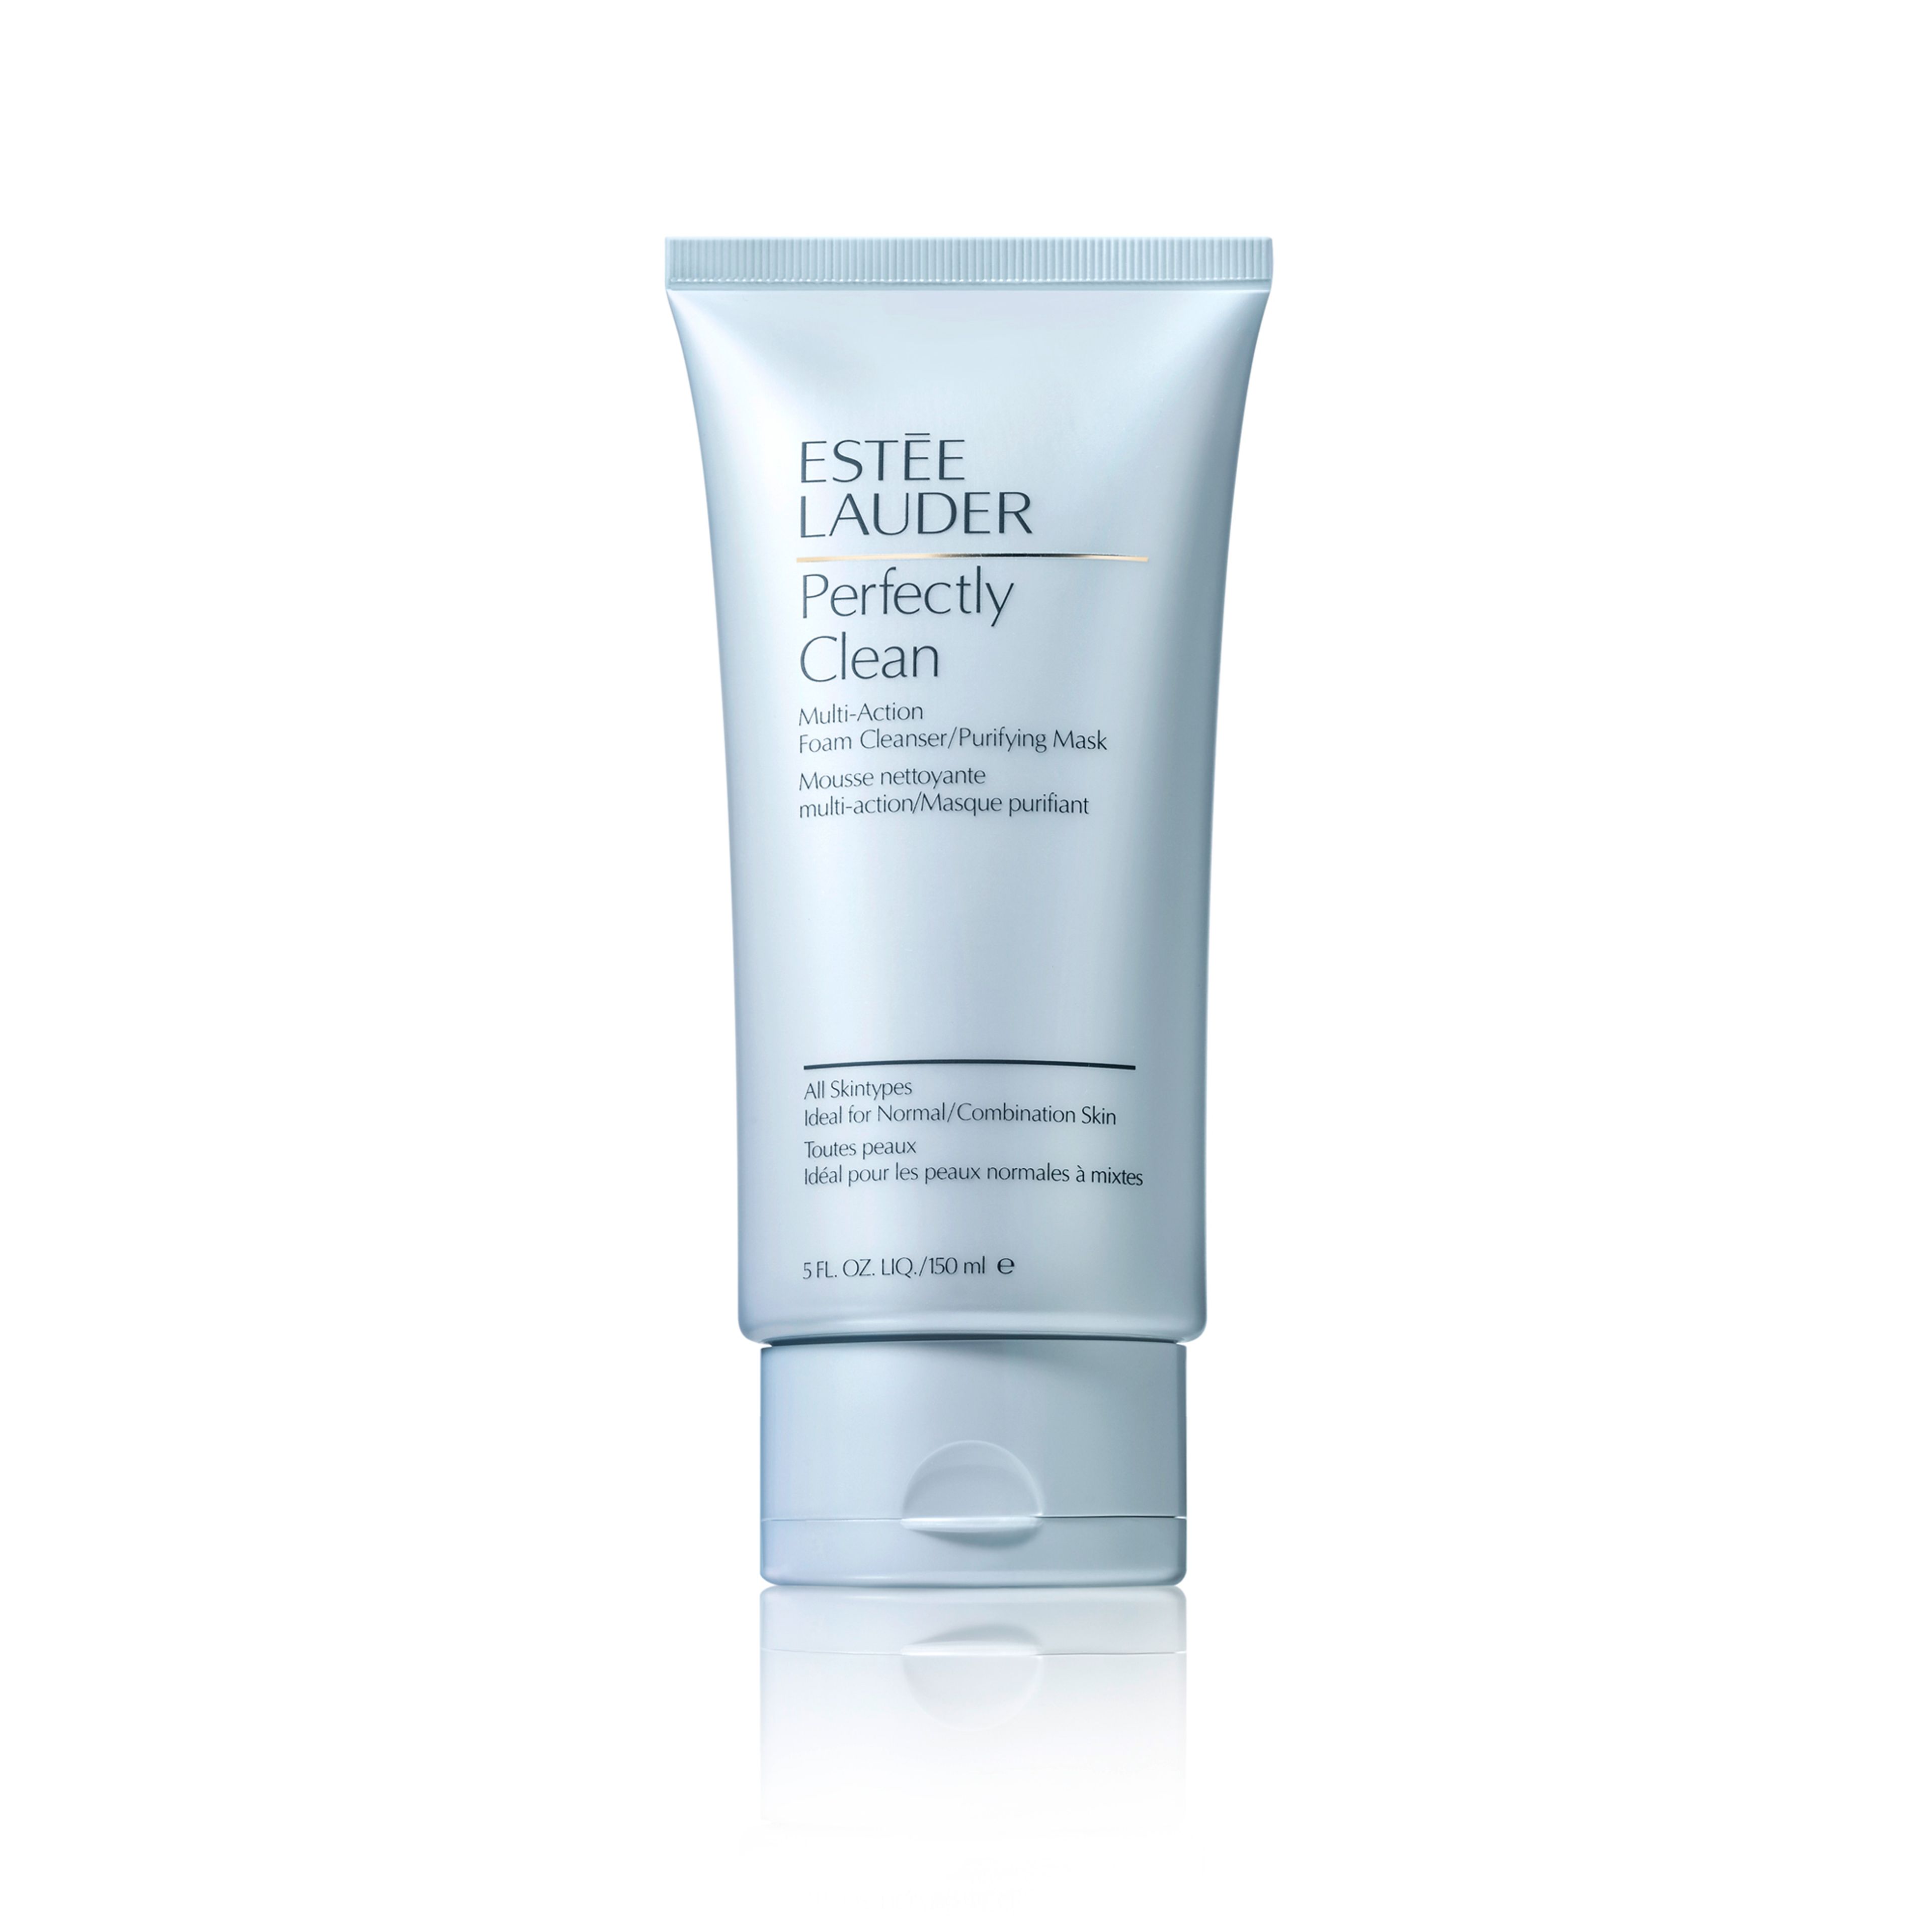 Estee Lauder Perfectly Clean Multi-action Foam Cleanser/puryfying Mask 1